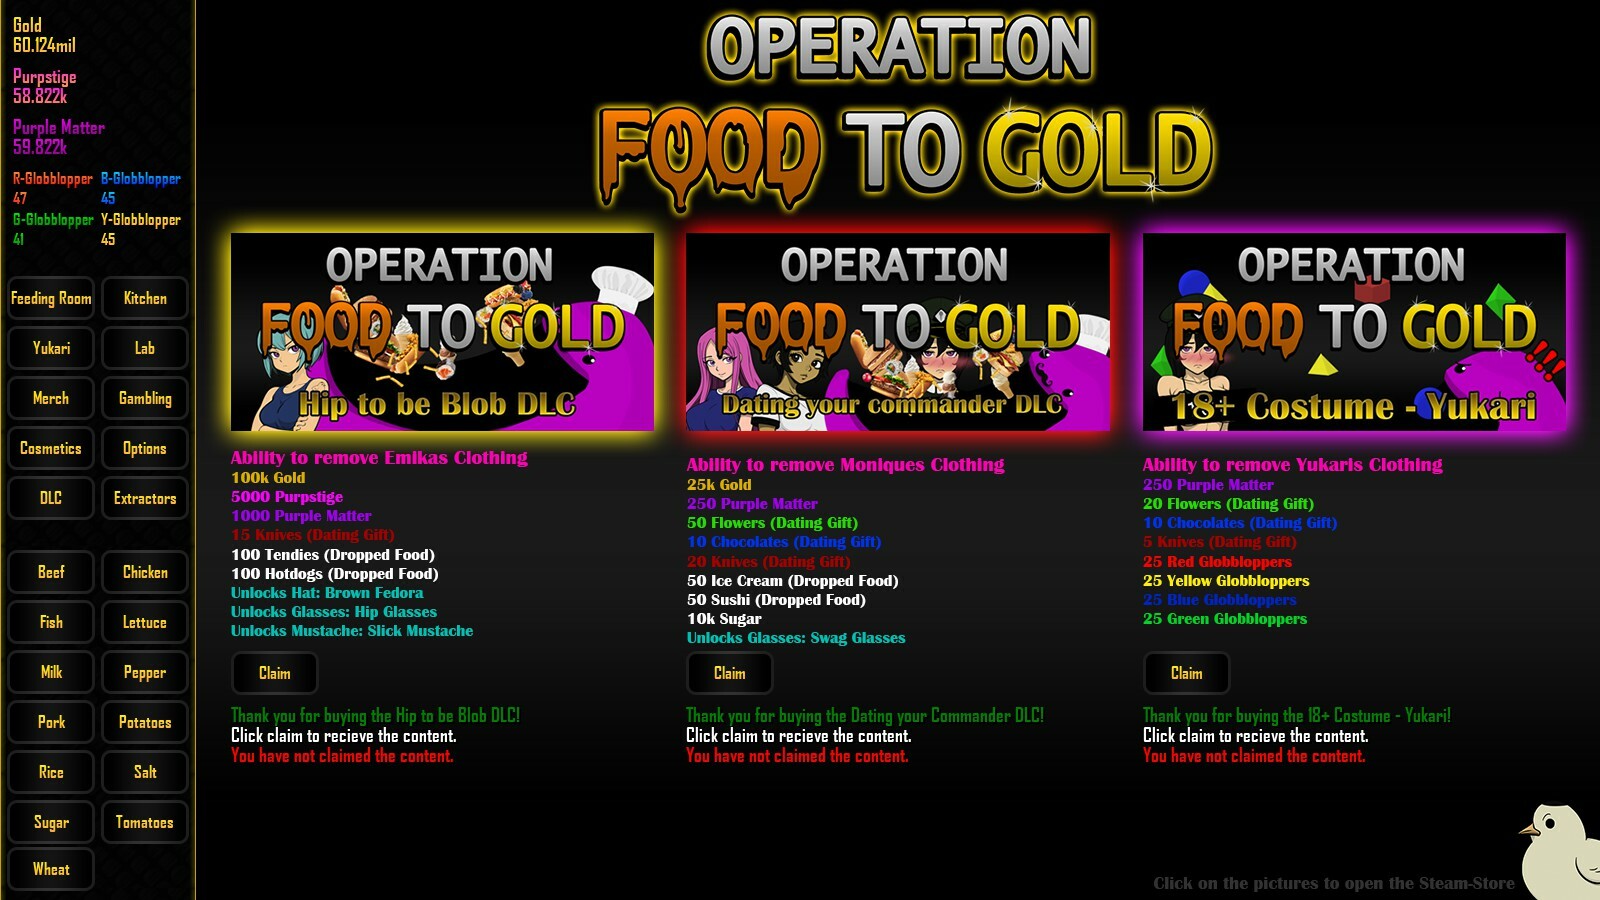 Operation Food to Gold - Hip to be Blob DLC Featured Screenshot #1